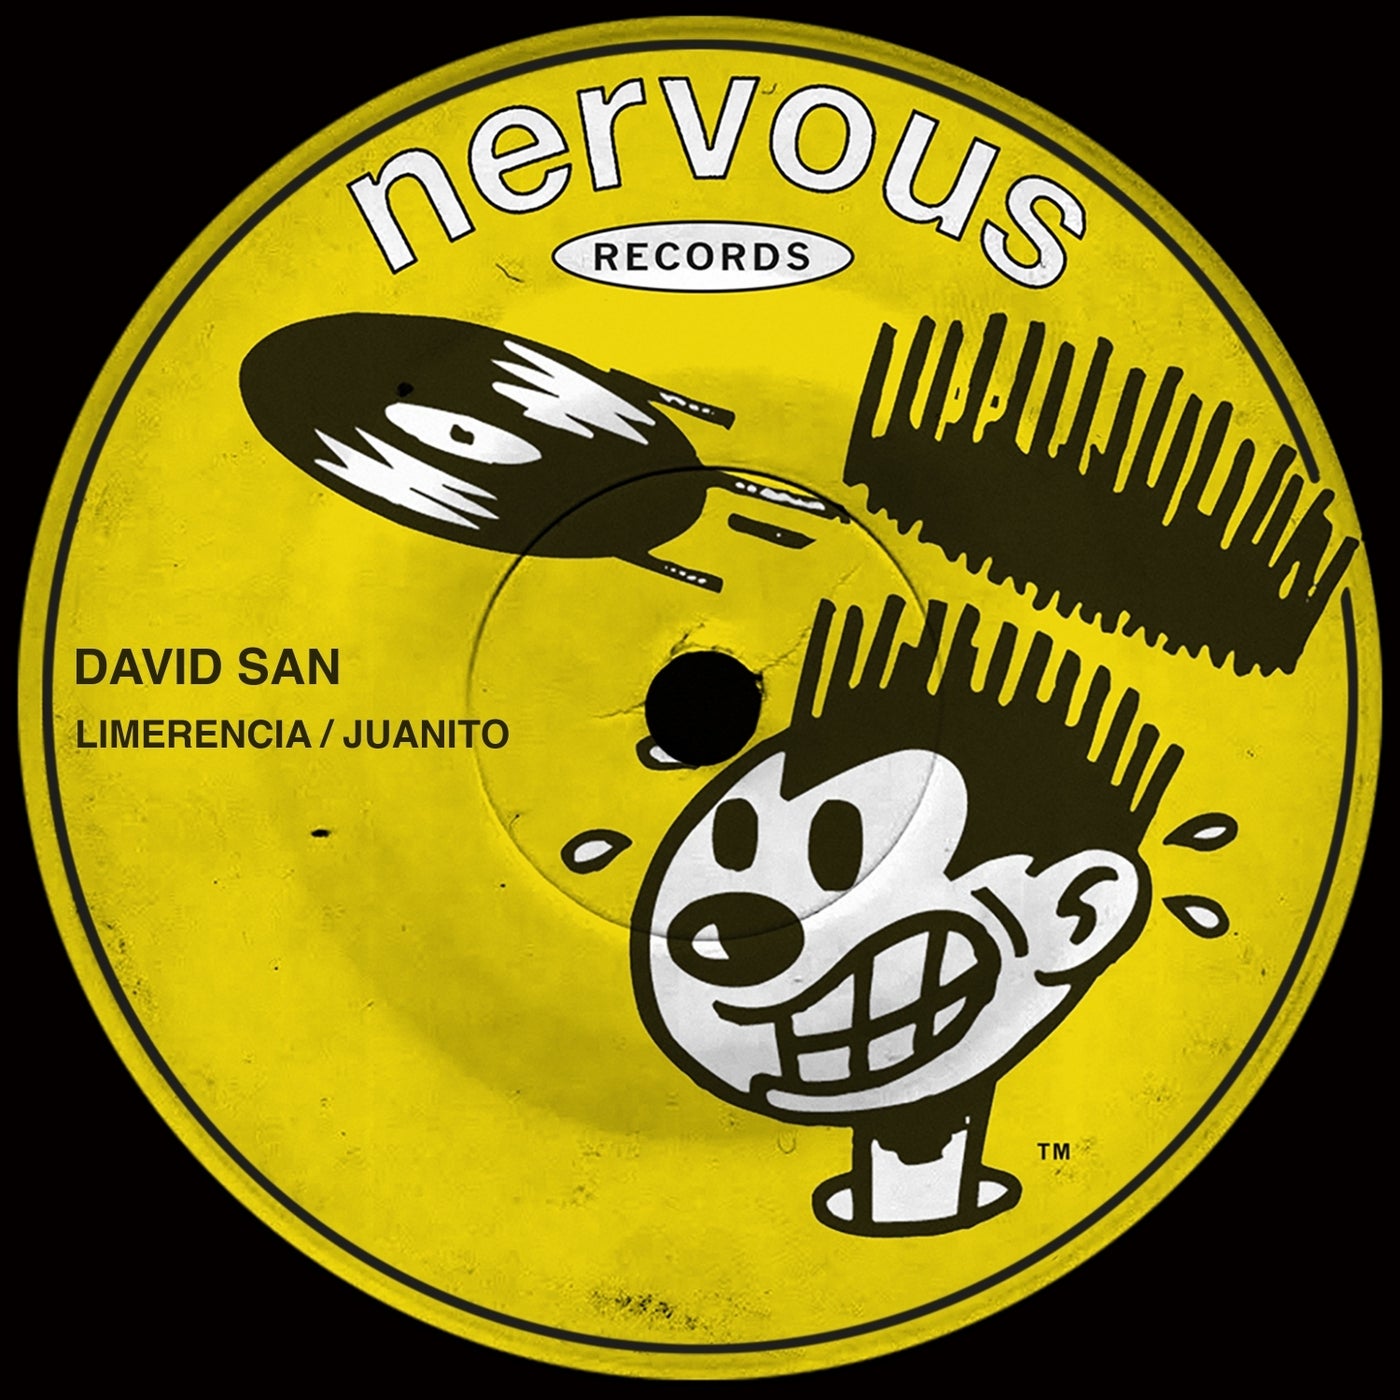 image cover: David San - Limerencia / Juanito on Nervous Records